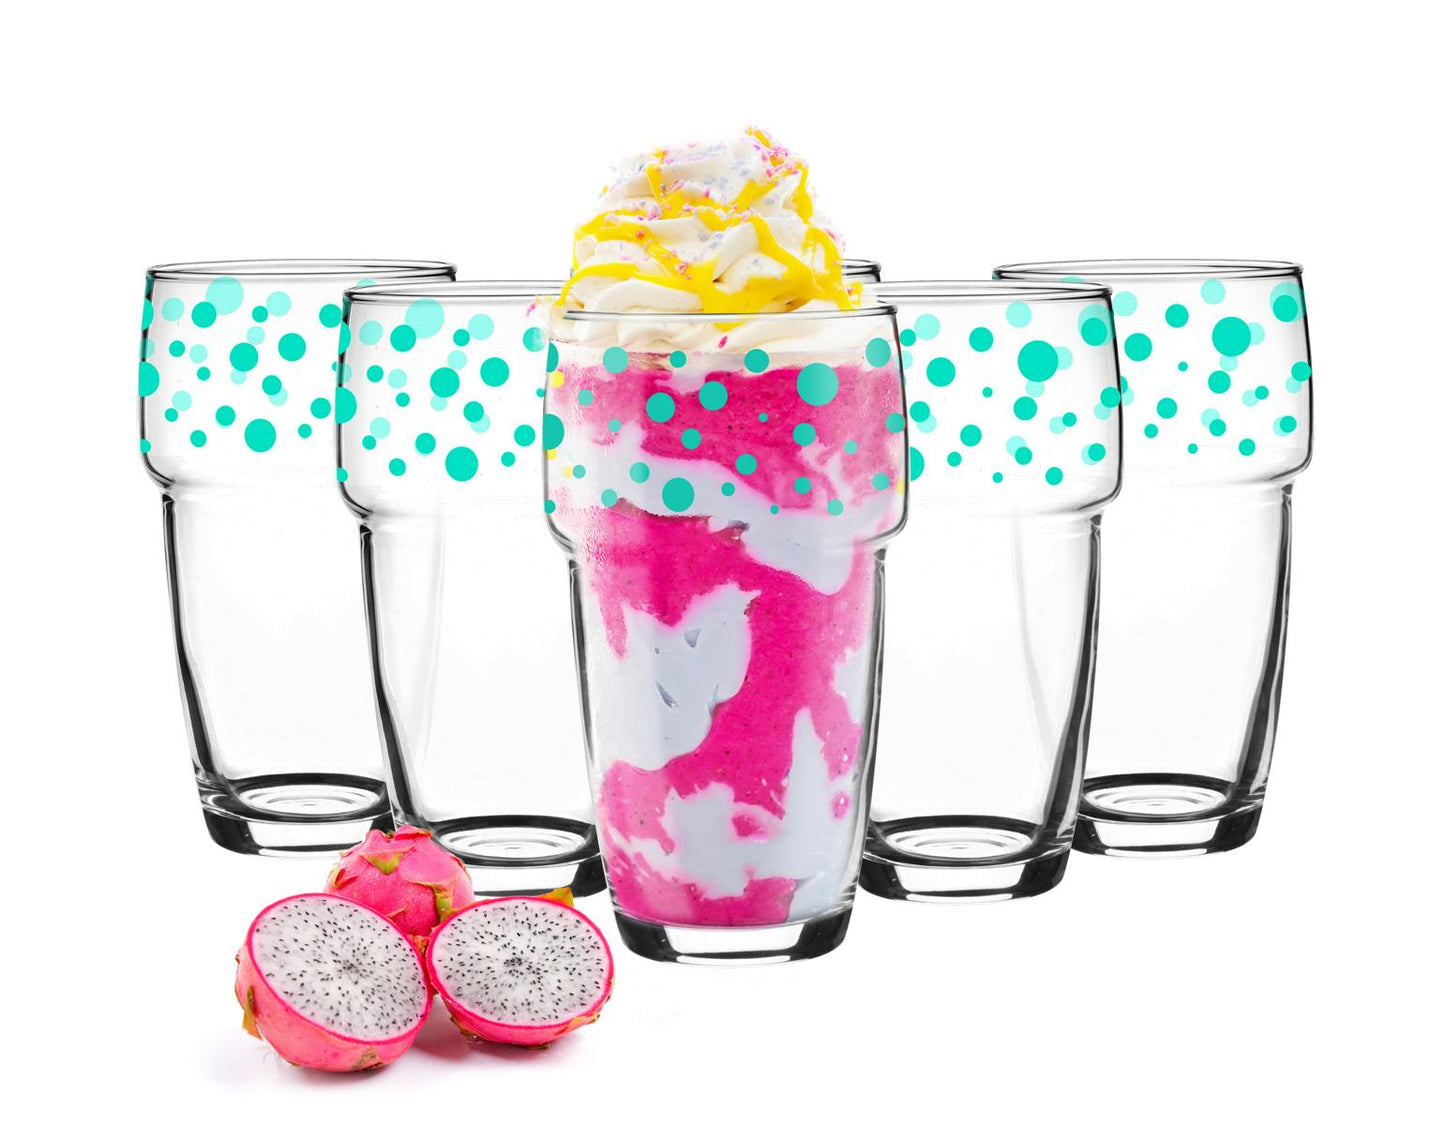 6 stackable drinking glasses 300ml coffee glasses juice glasses glasses turquoise dots